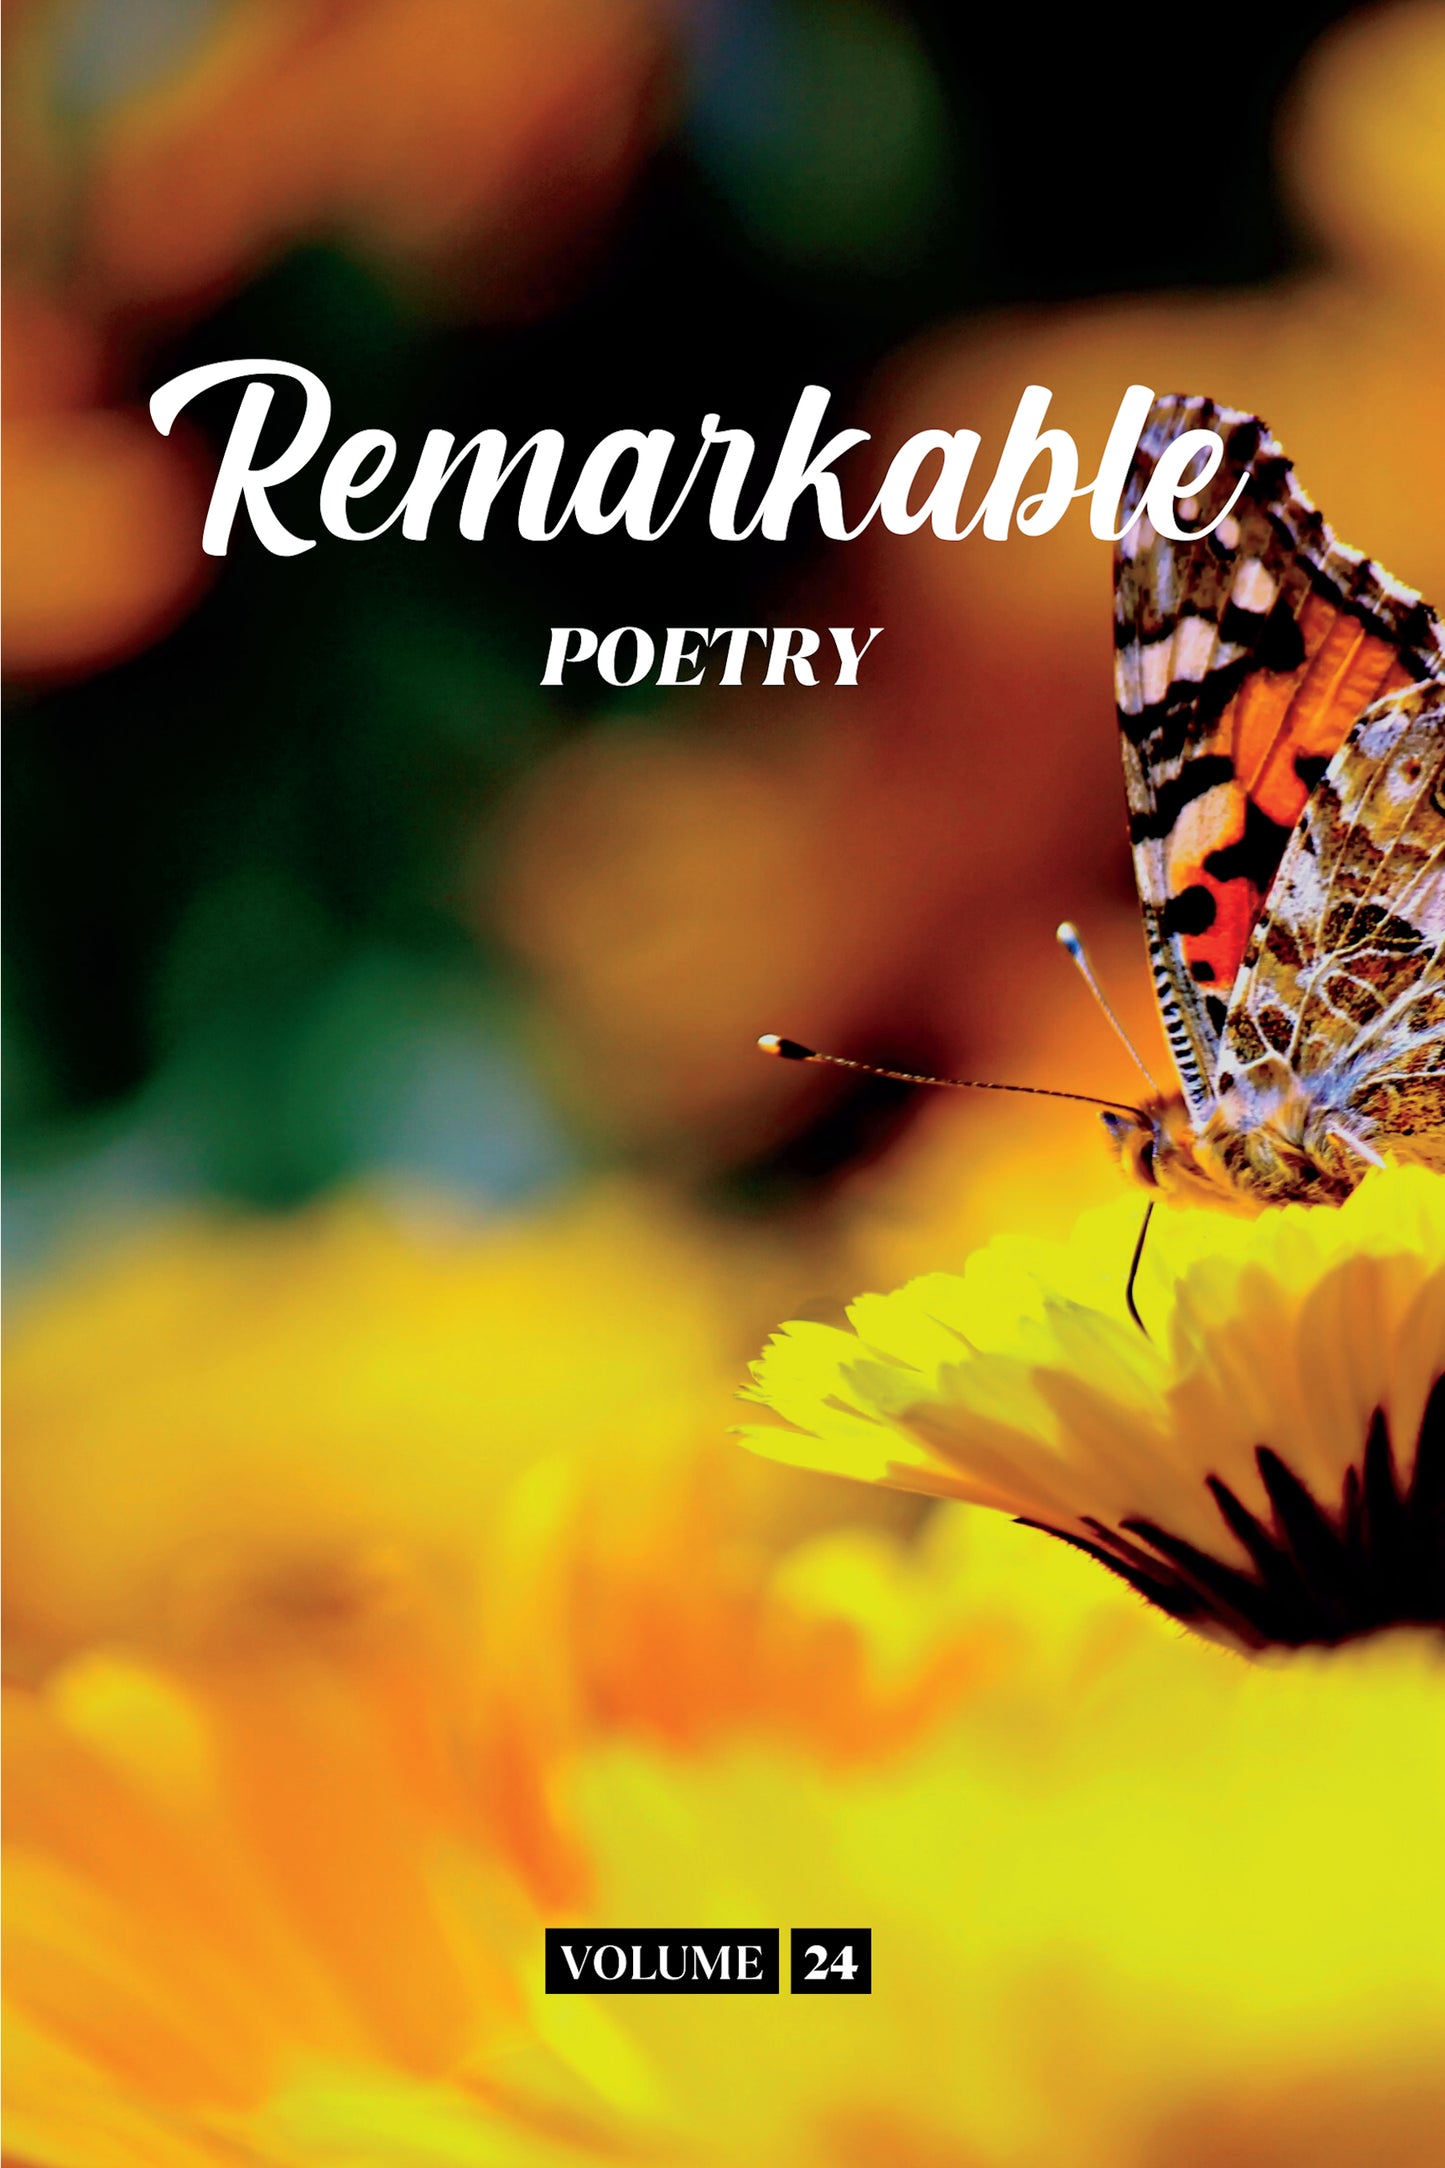 Remarkable Poetry (Volume 24) - Physical Book (Pre-Order)